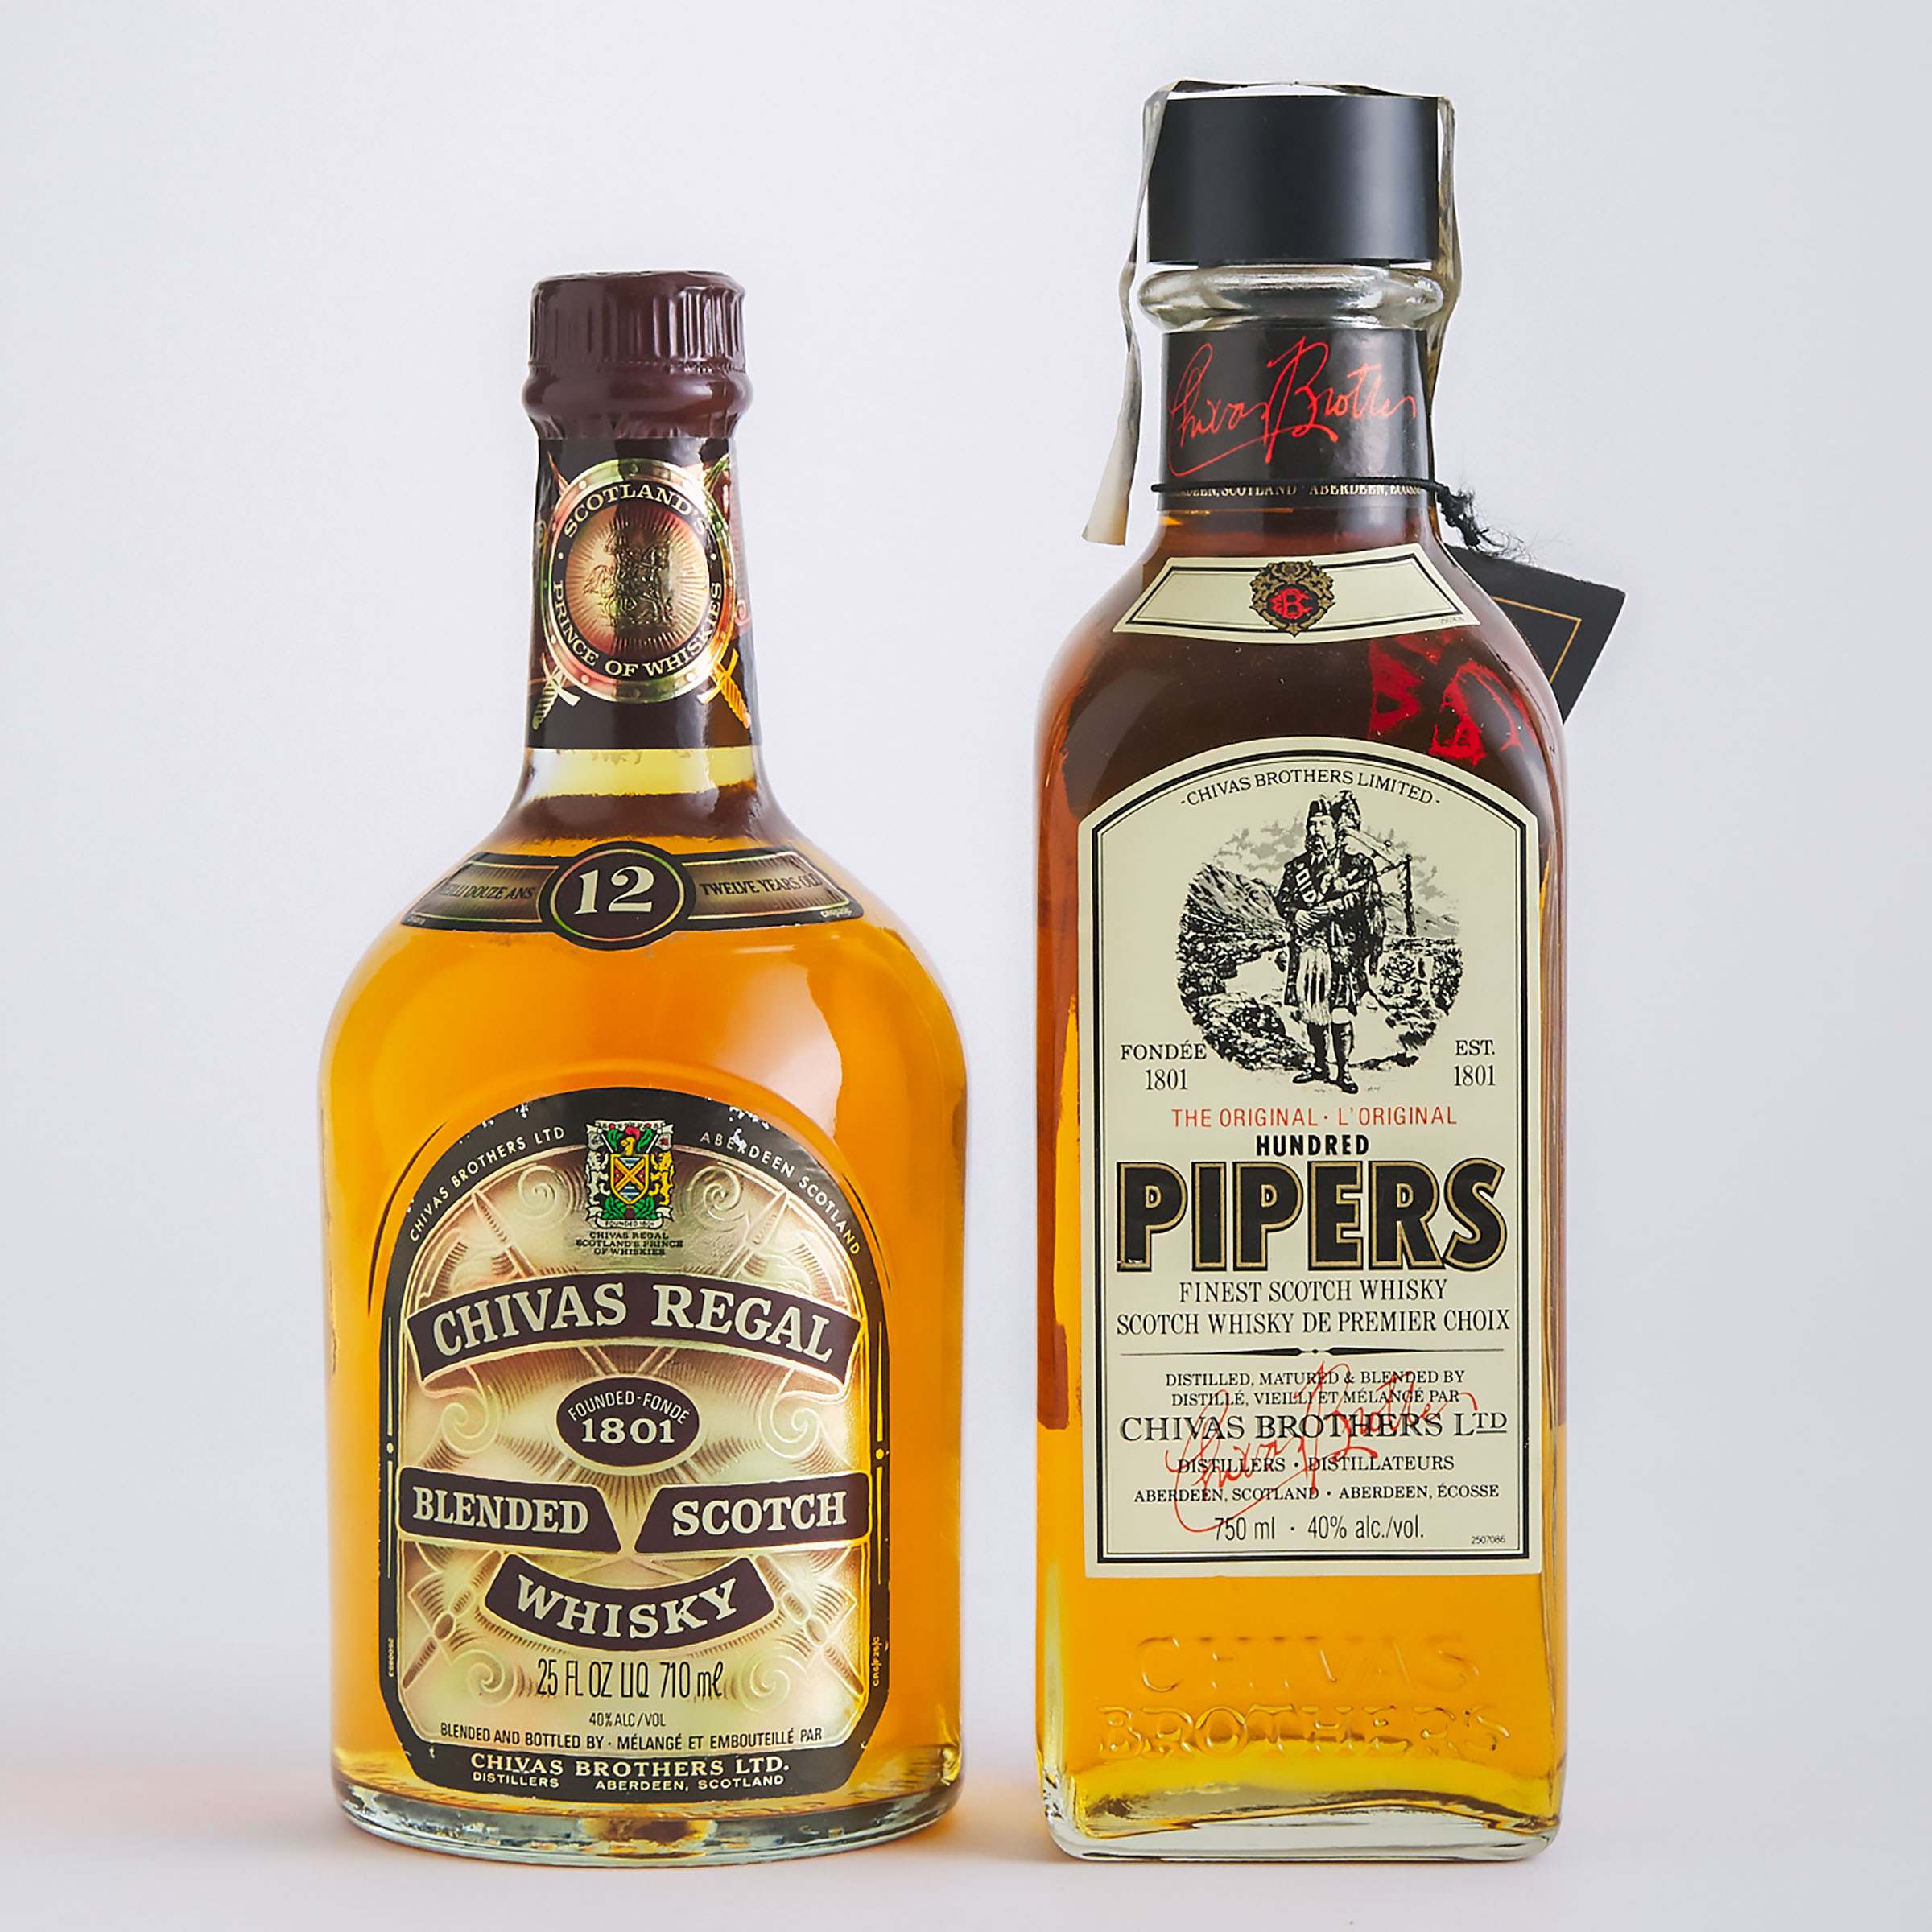 CHIVAS REGAL BLENDED SCOTCH WHISKY 12 YEARS (ONE 710 ML)
HUNDRED PIPERS SCOTCH WHISKY (ONE 750 ML)